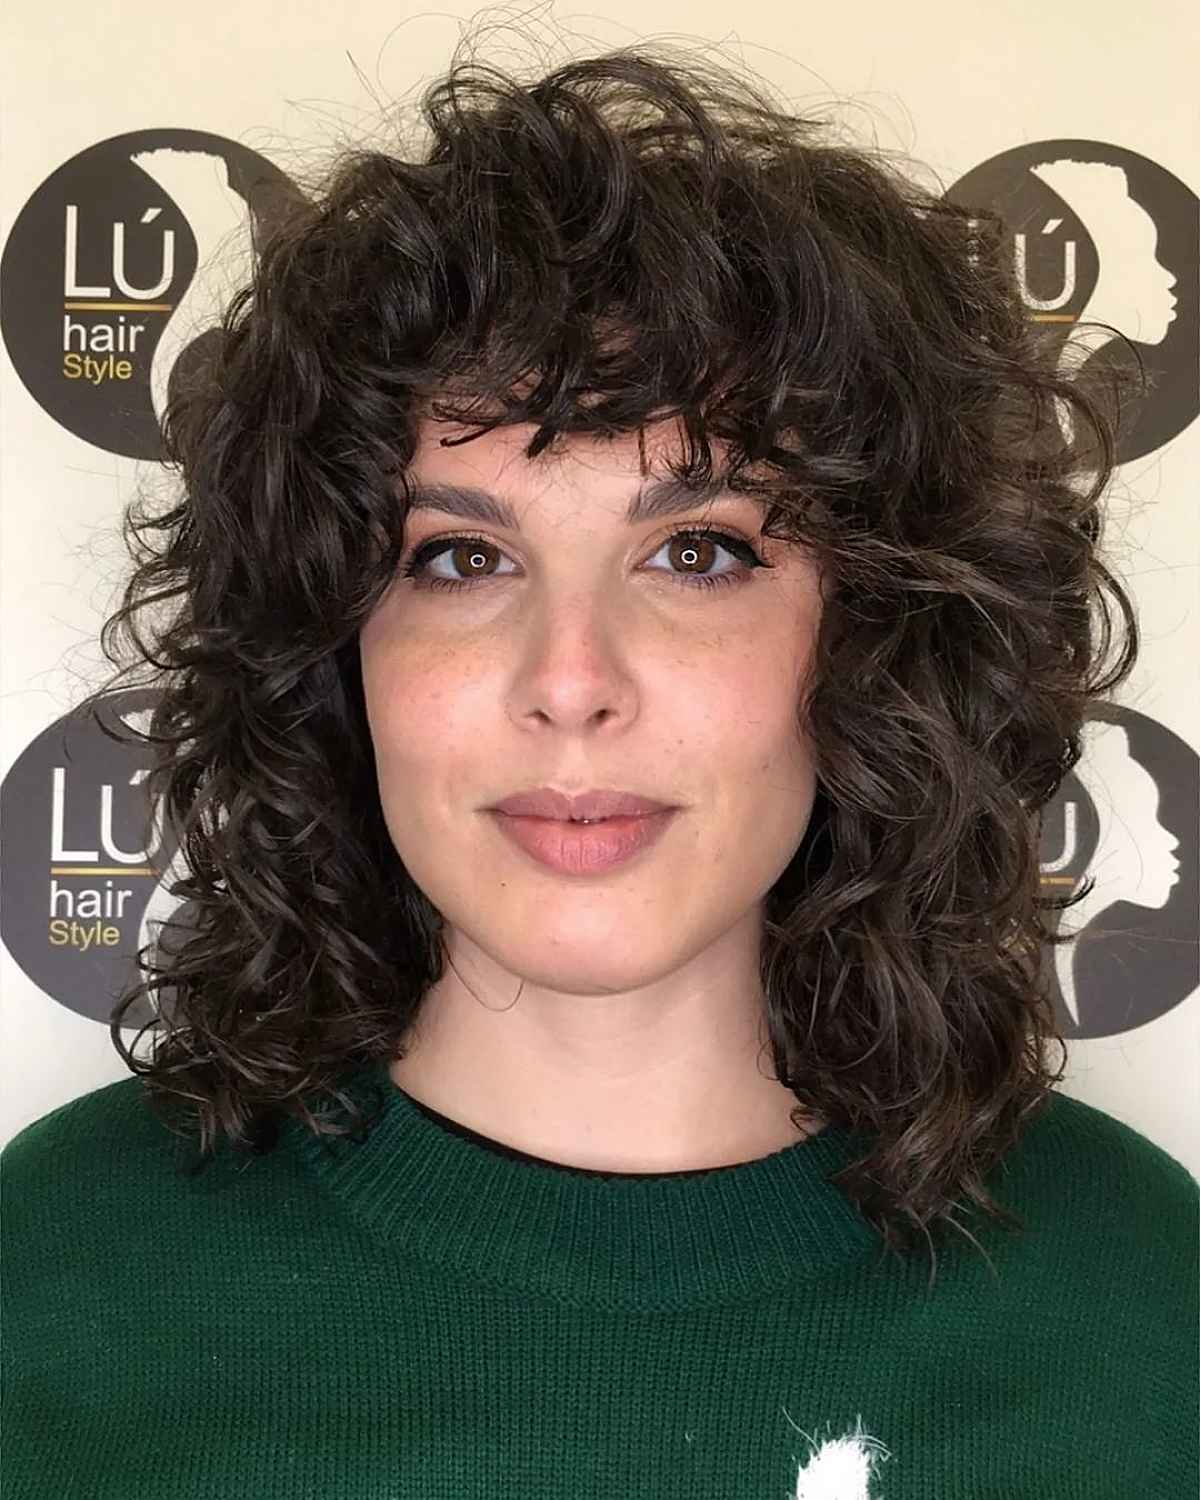 Shoulder-Length Wolf Cut with Big Curls and Waves